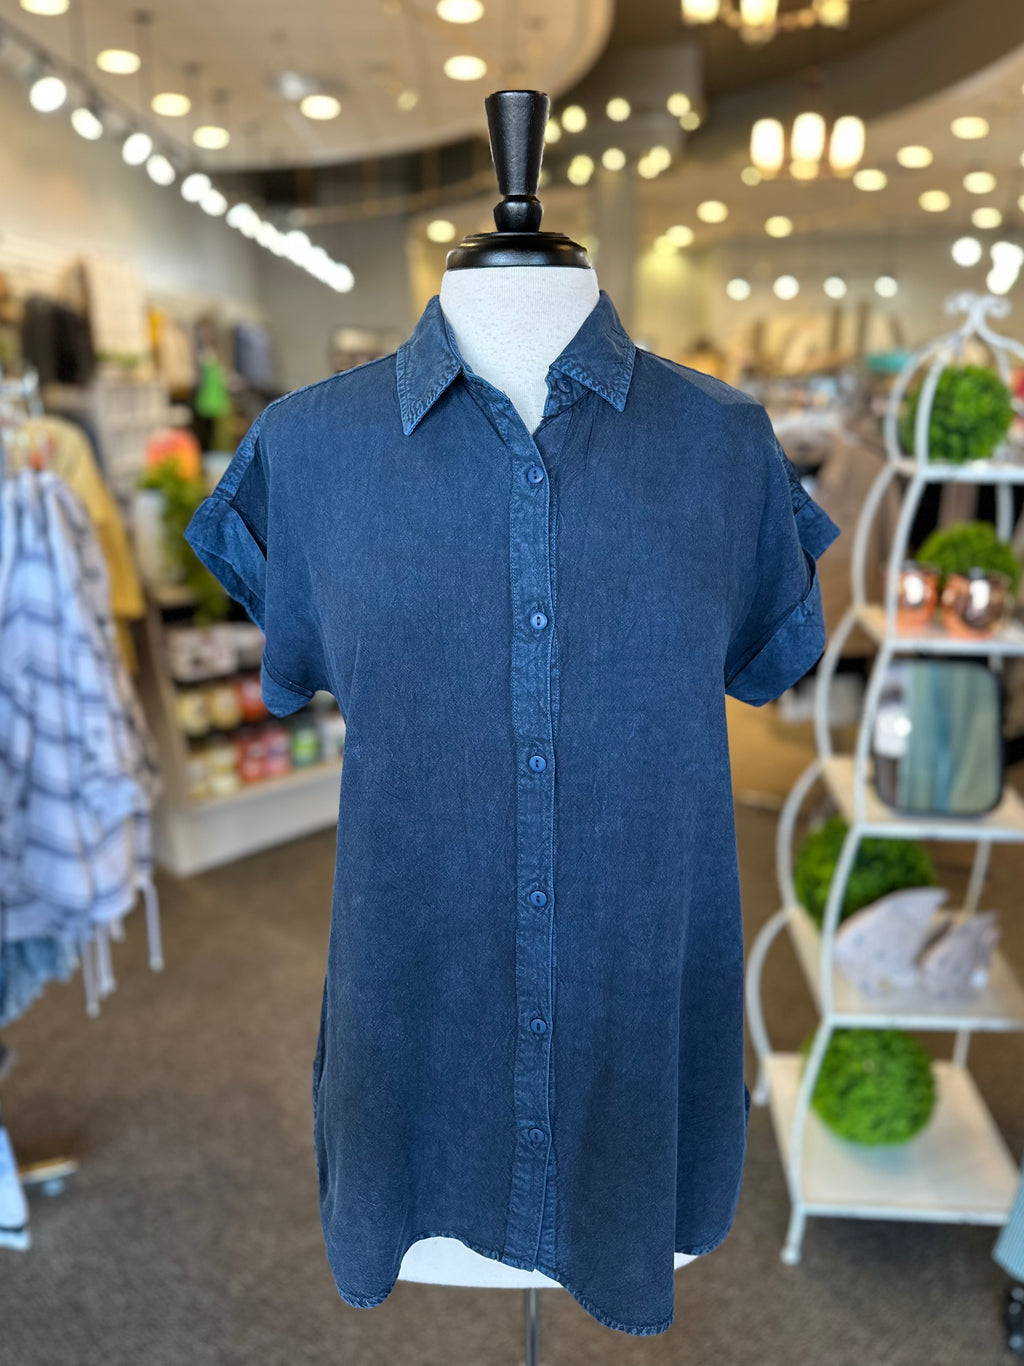 Keren Hart Short Sleeve Button Down Mineral Washed Top